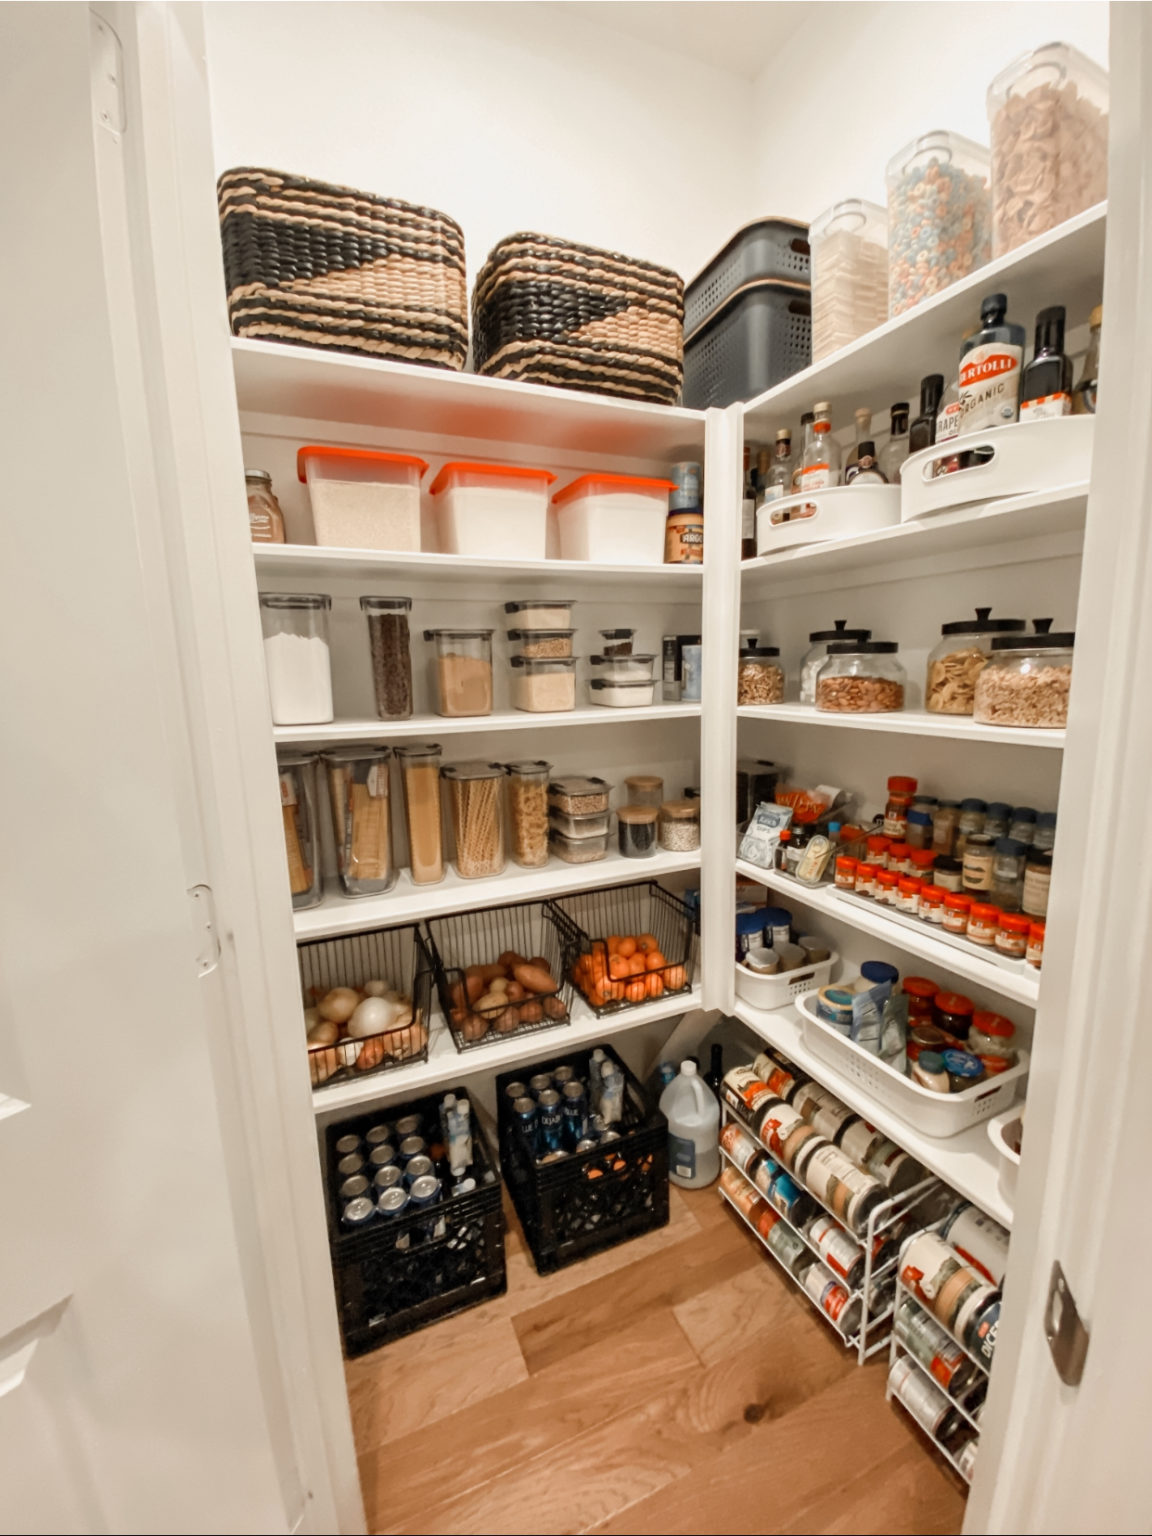 Useful Pantry Organizers to Help Save Time in the Kitchen - Meatball Mom